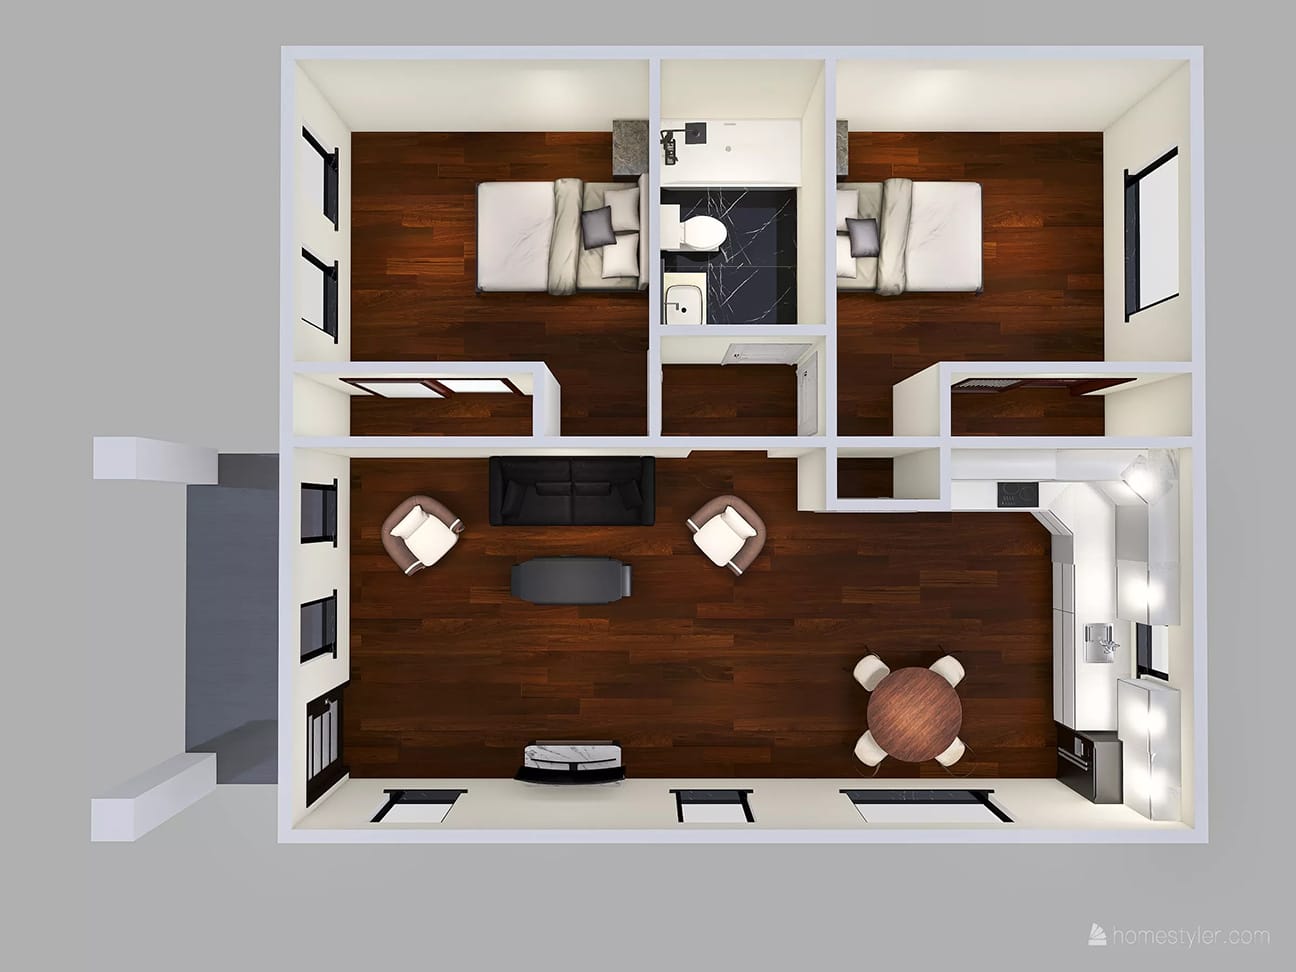 672 sqf Two Bedroom